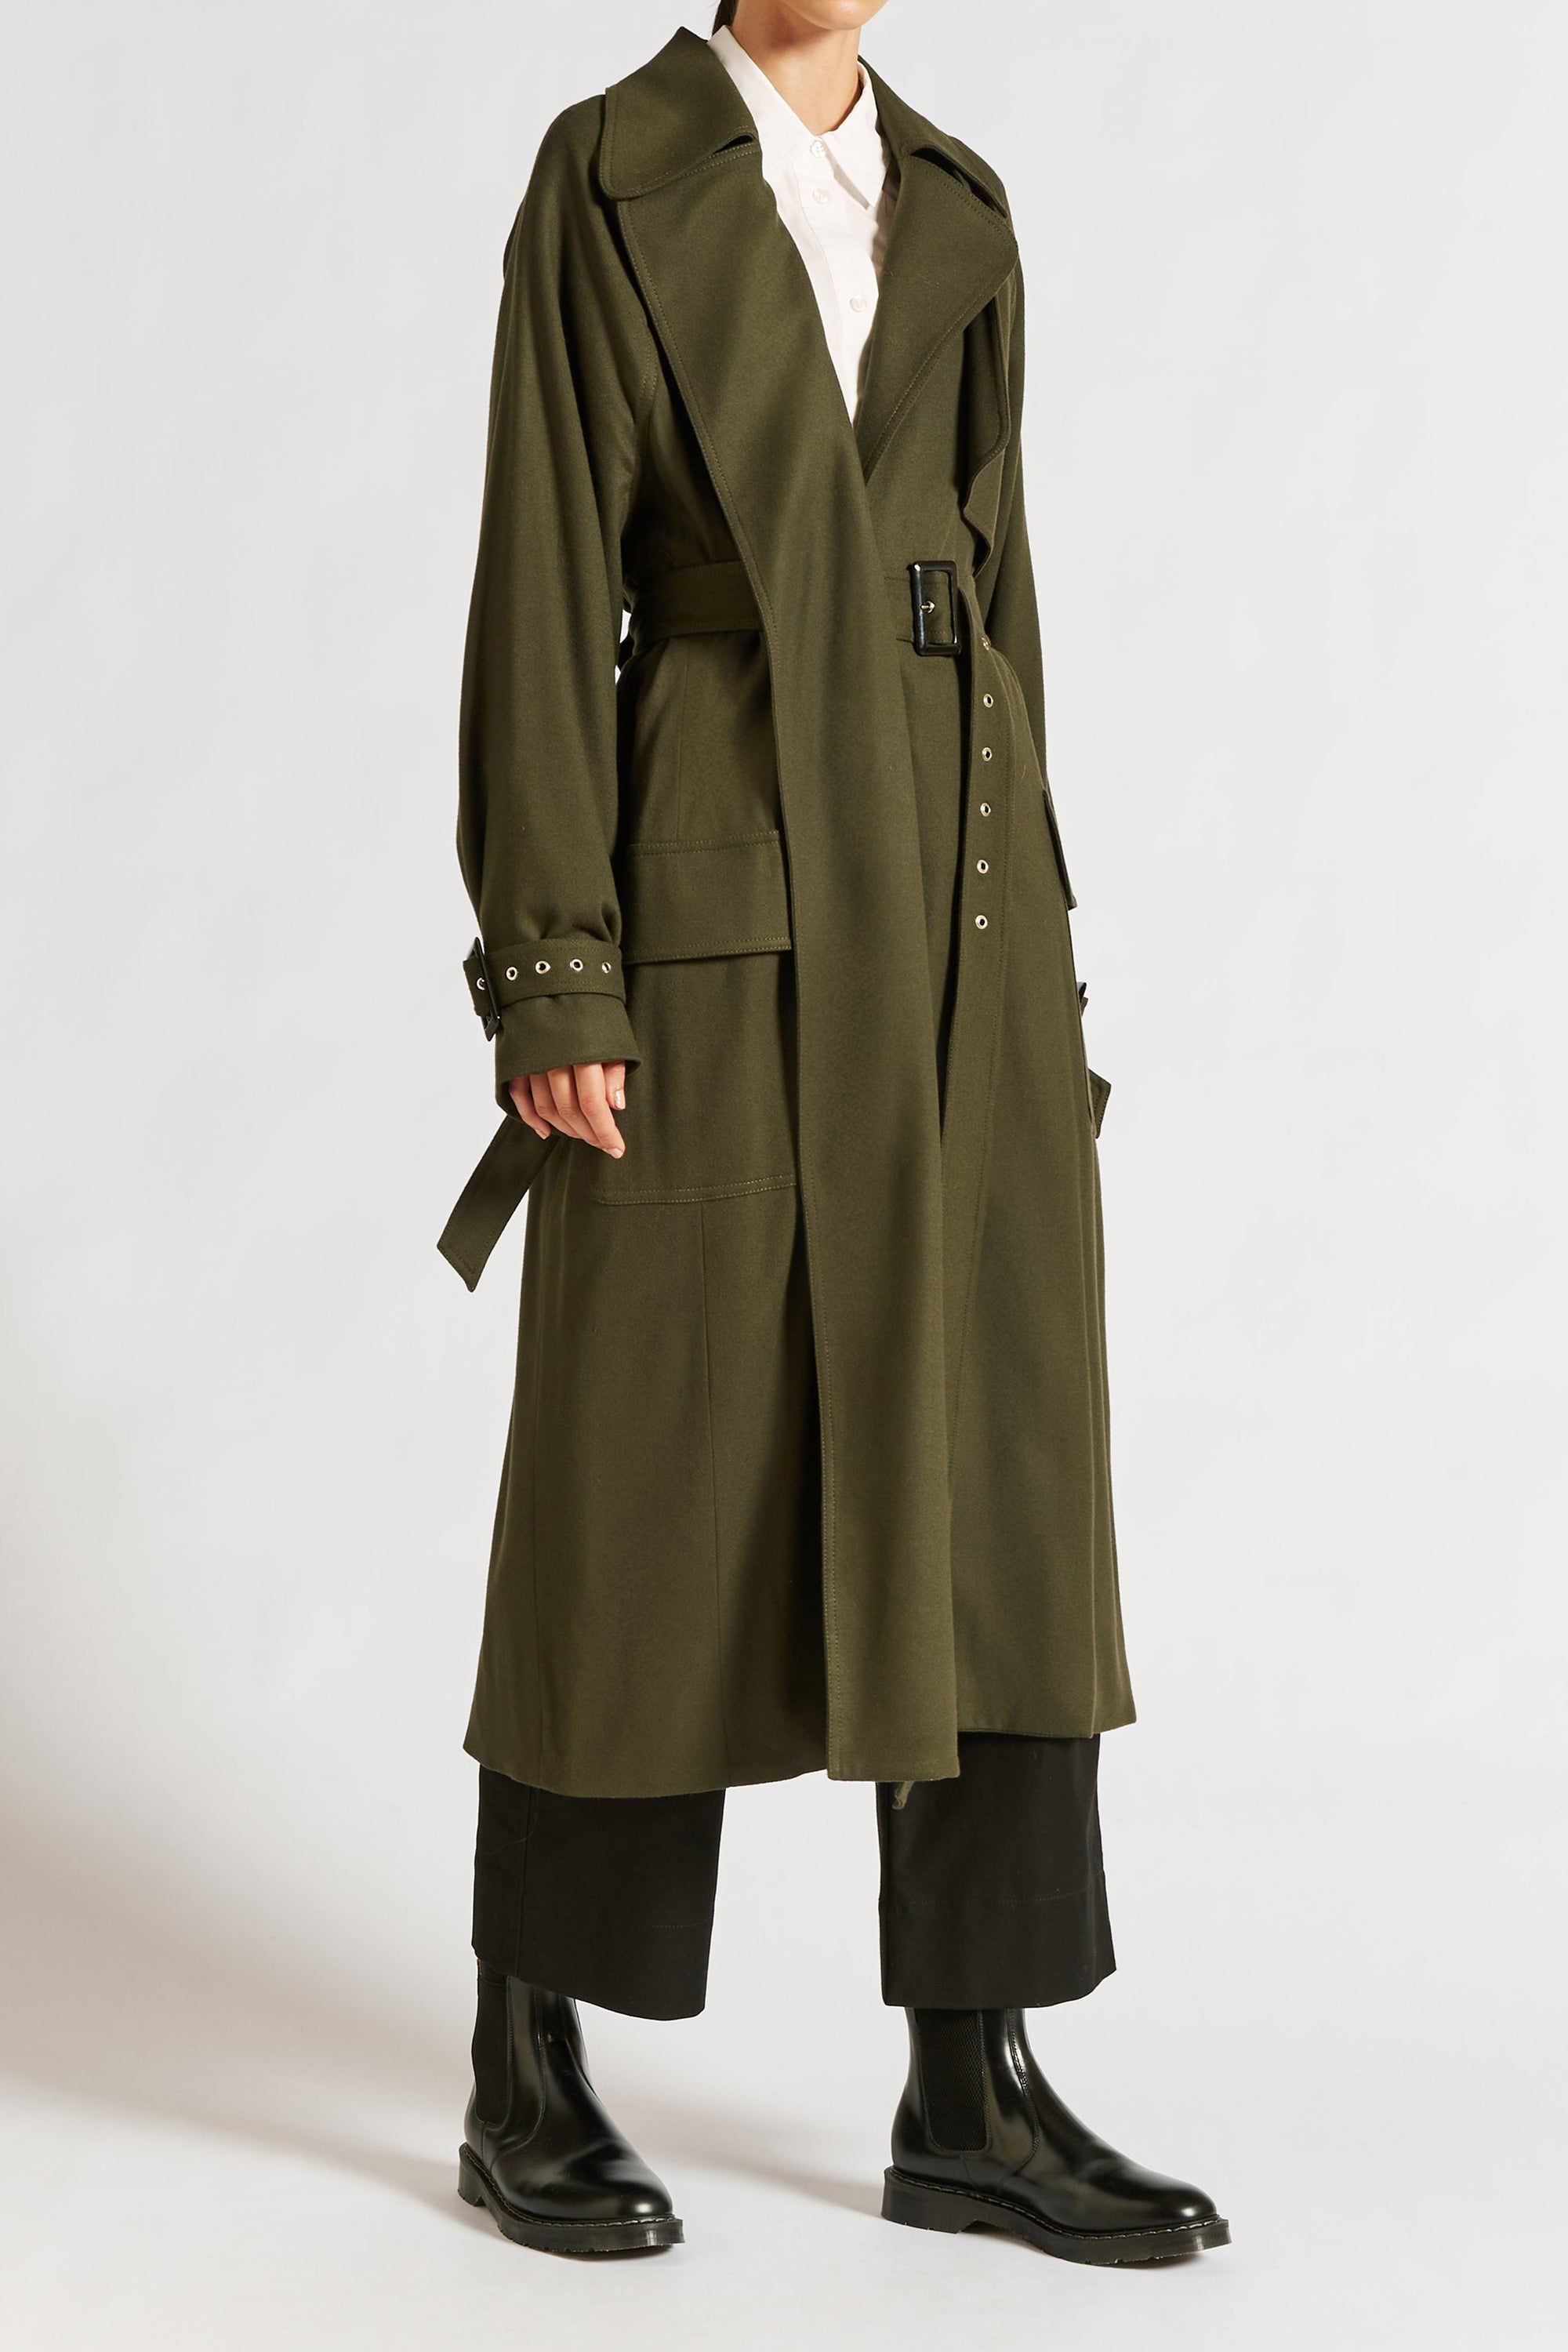 Lee Mathews | Logan Double Breasted Trench in Khaki